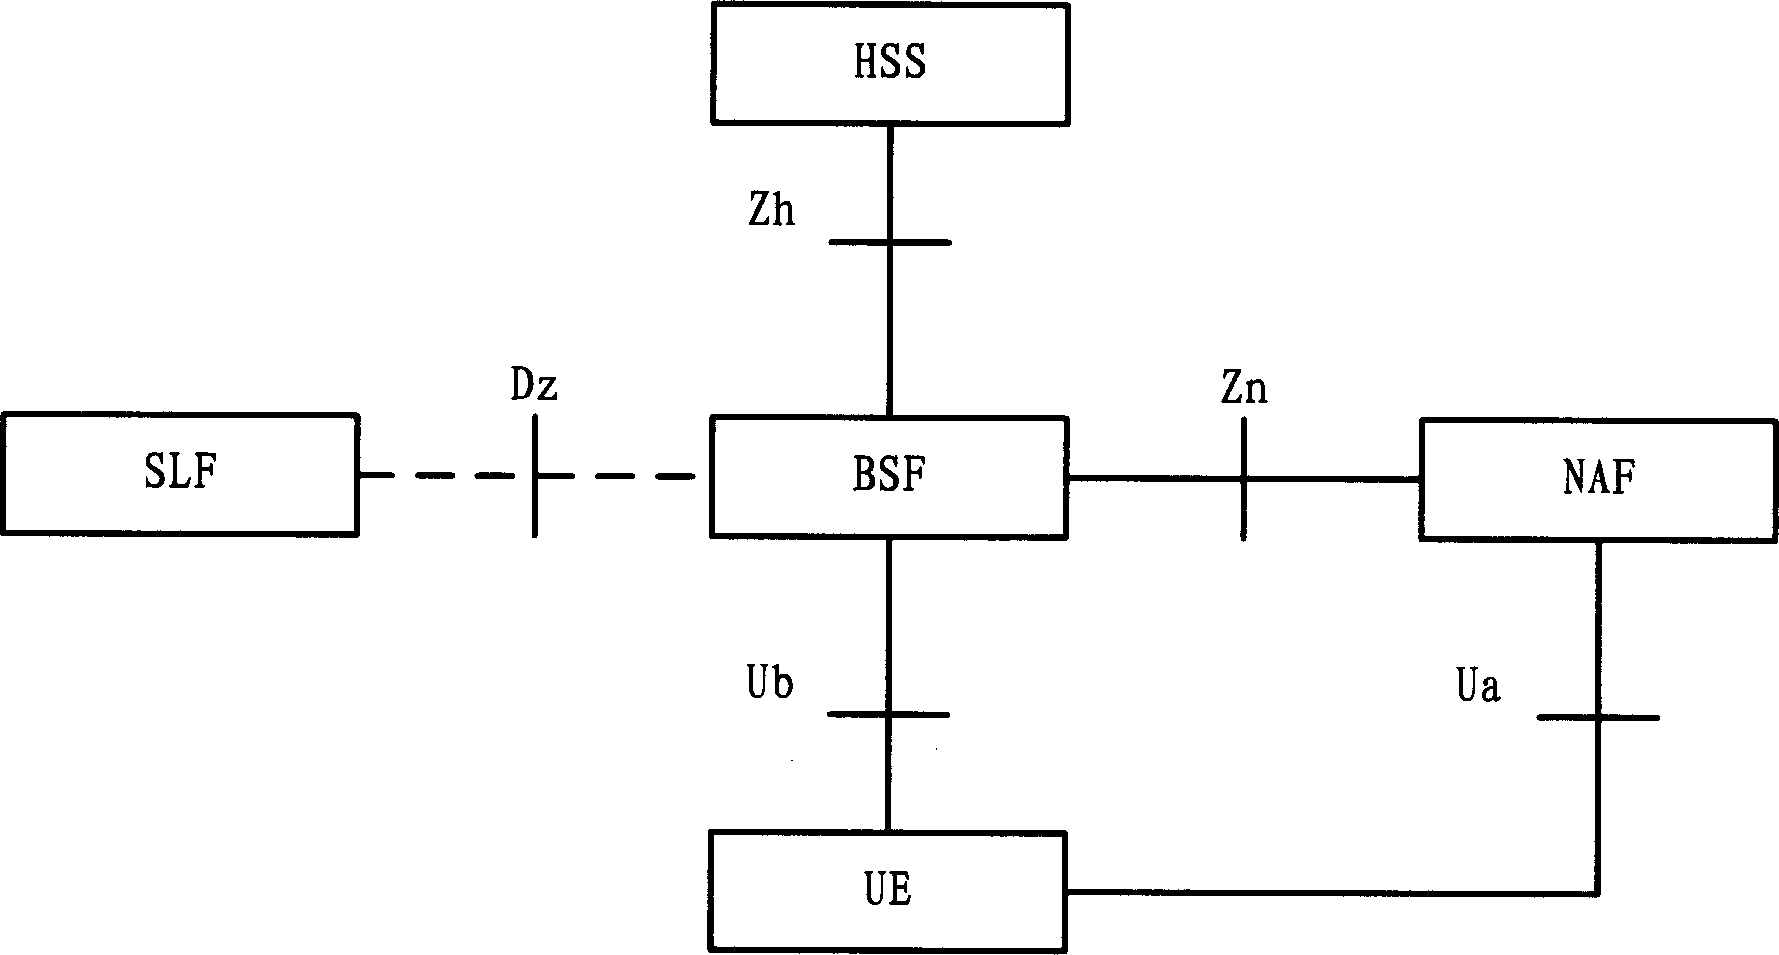 Ub interface information interaction method in general guiding frame